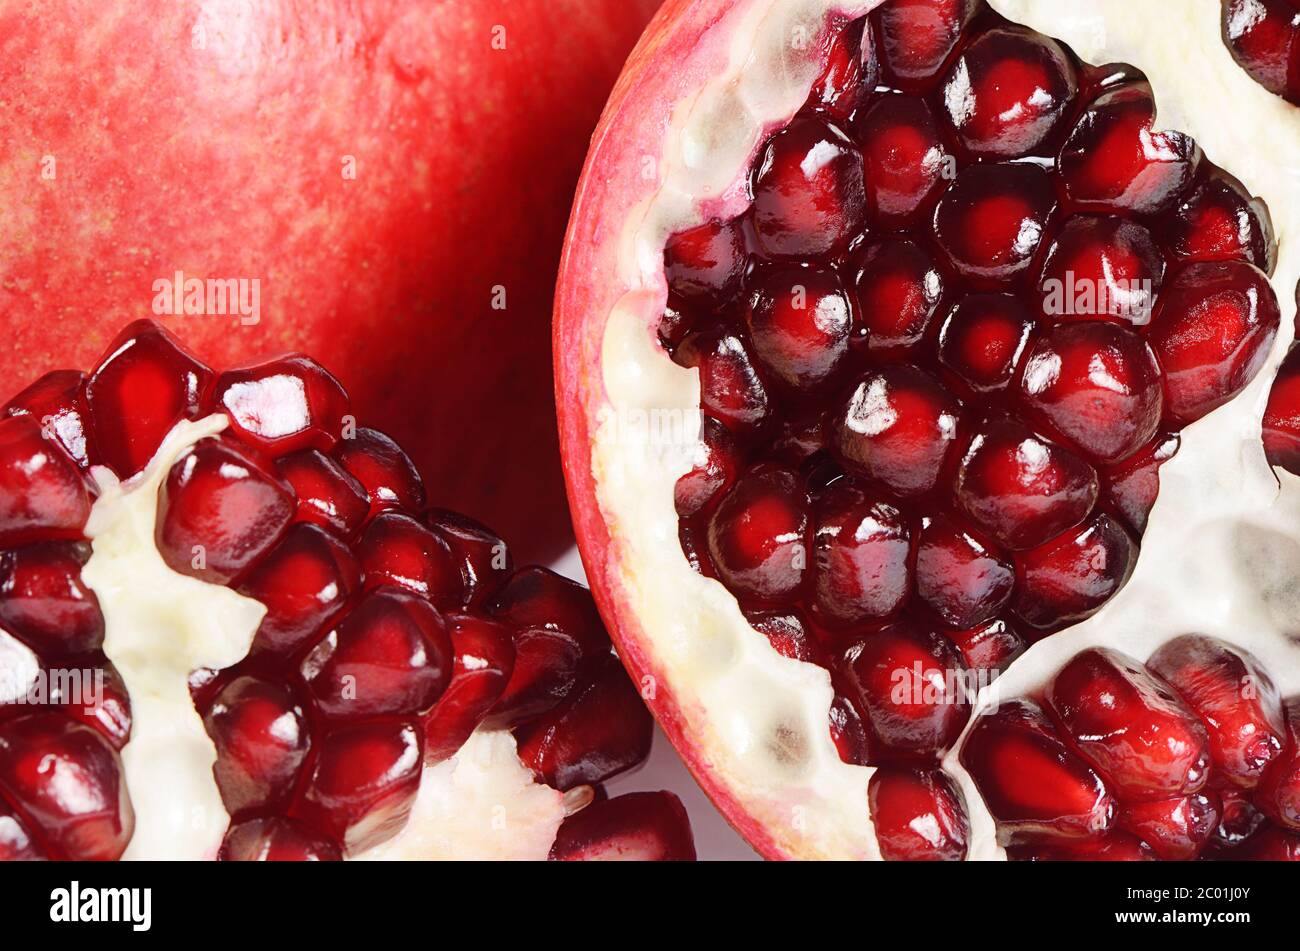 The fresh pomegranate as a background Stock Photo